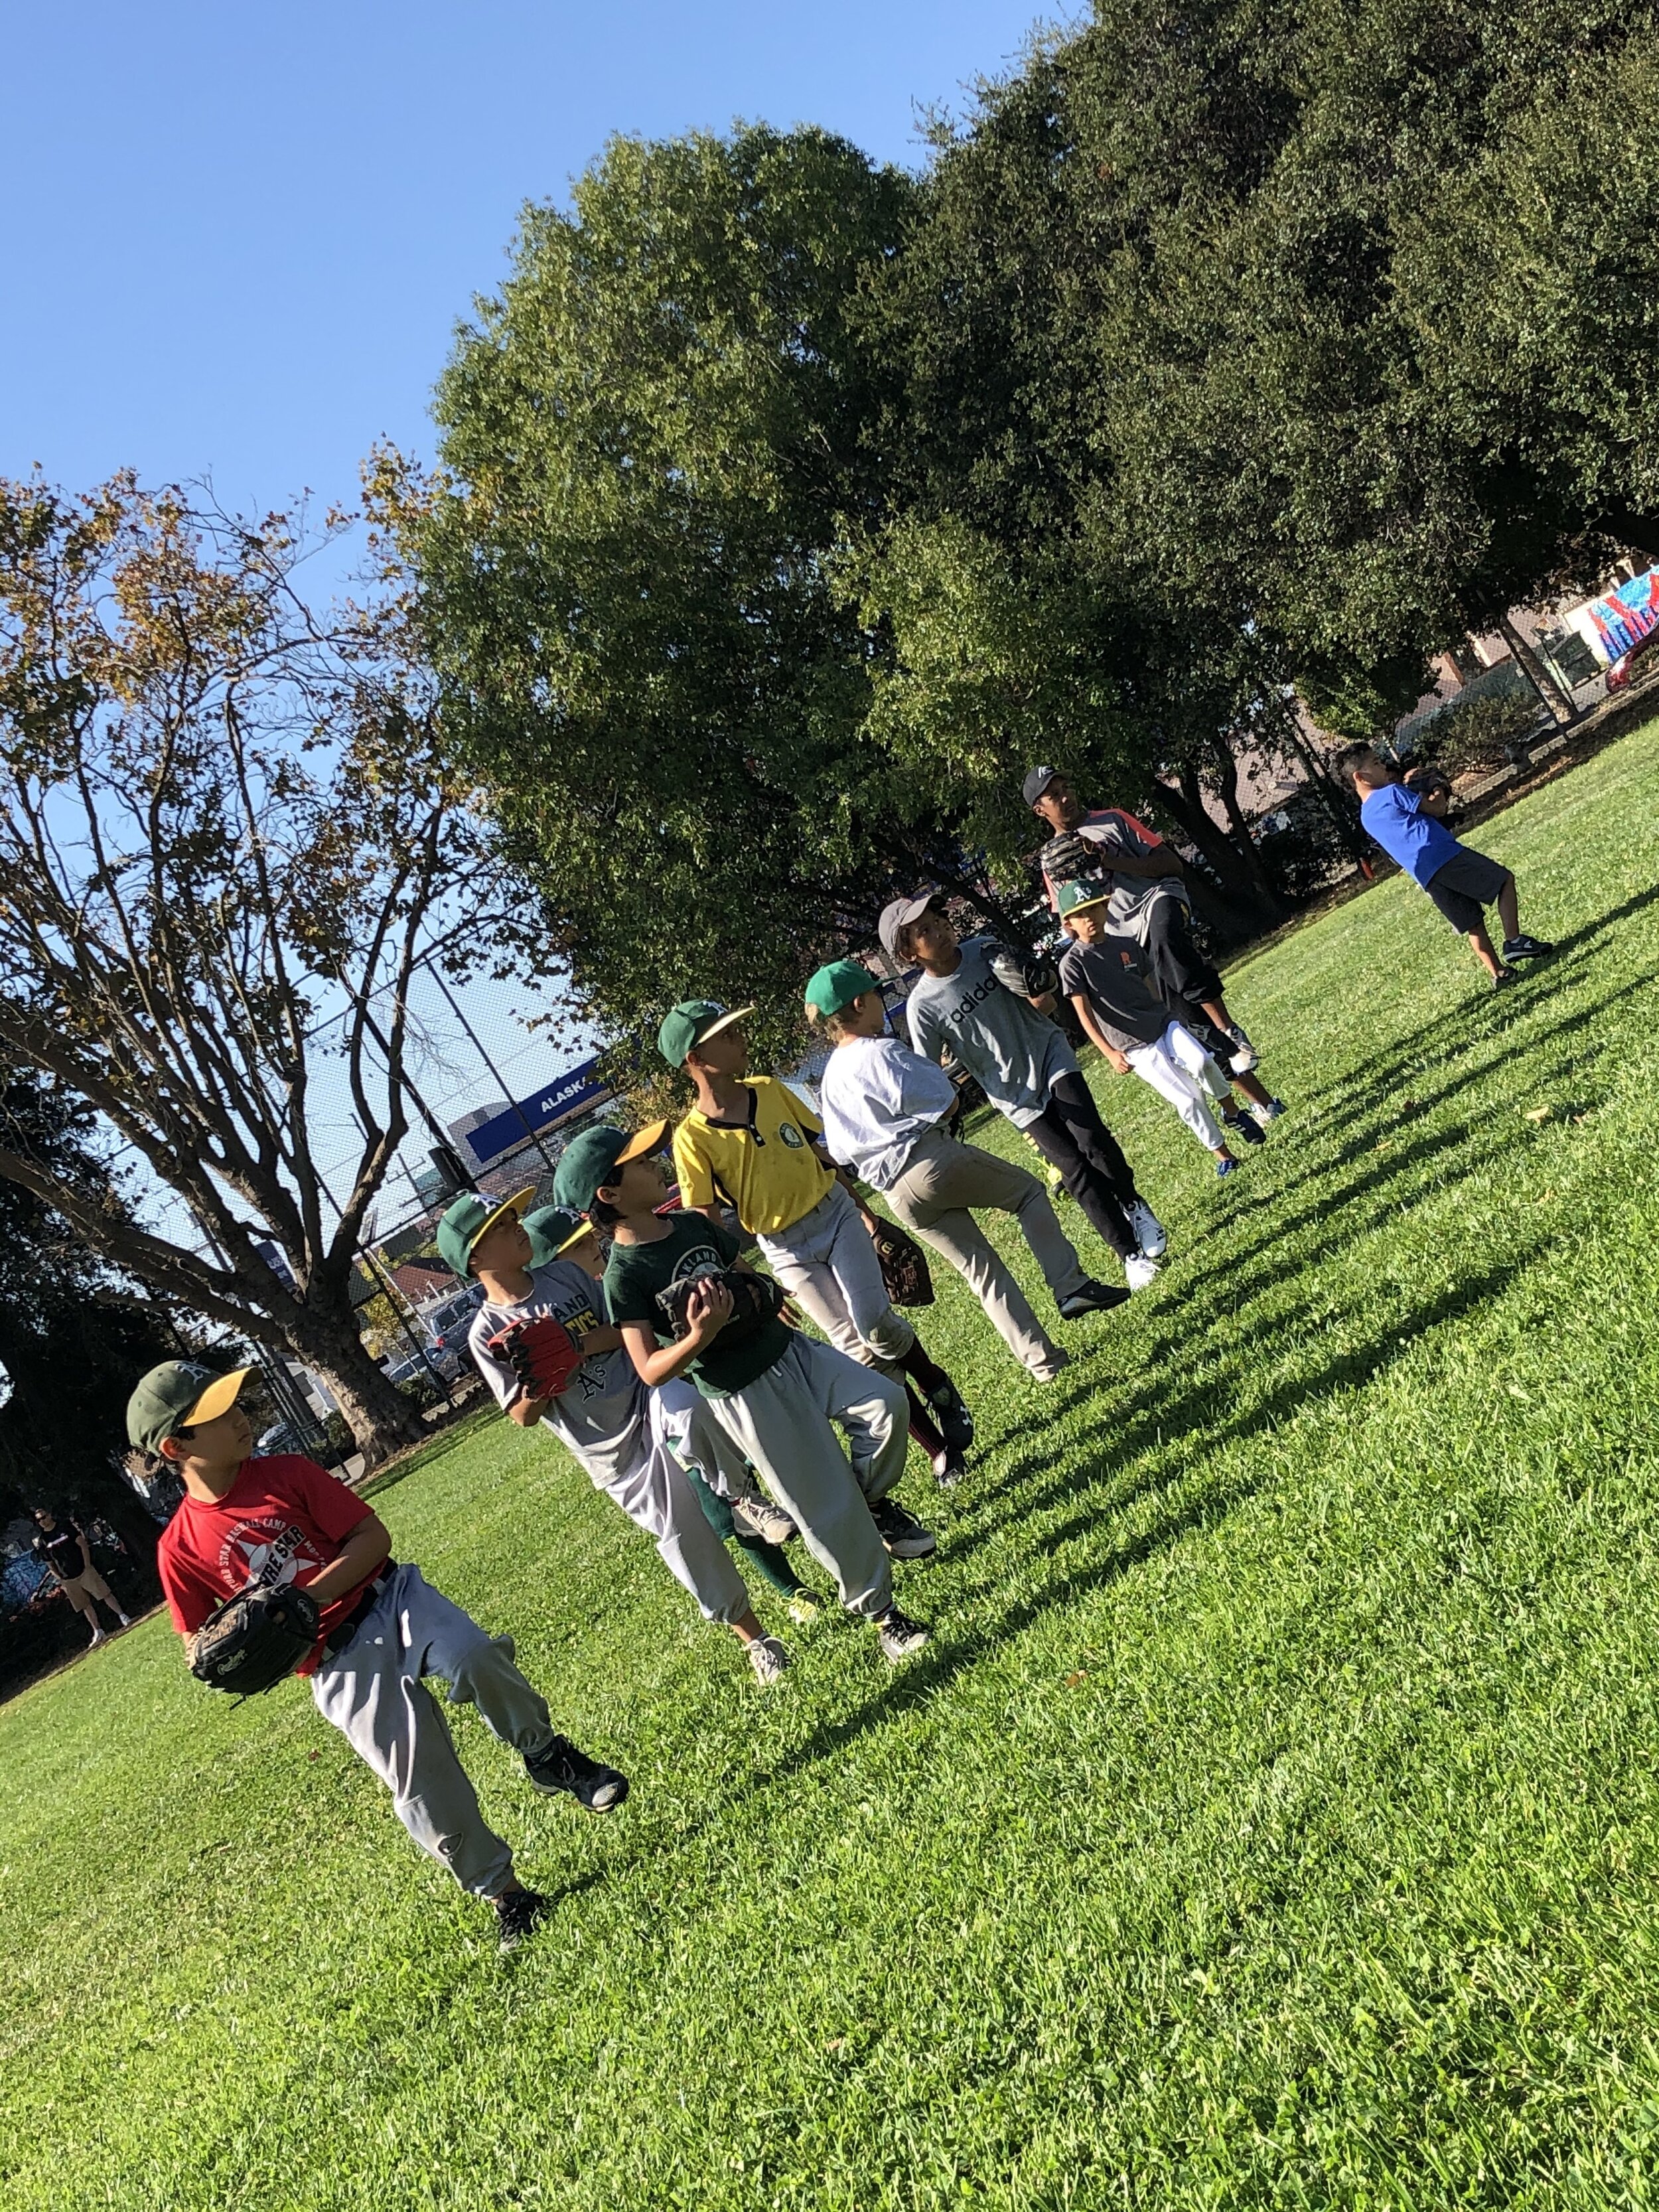 Pitching Drills @ AG Fitness Camp 2019 (Copy)